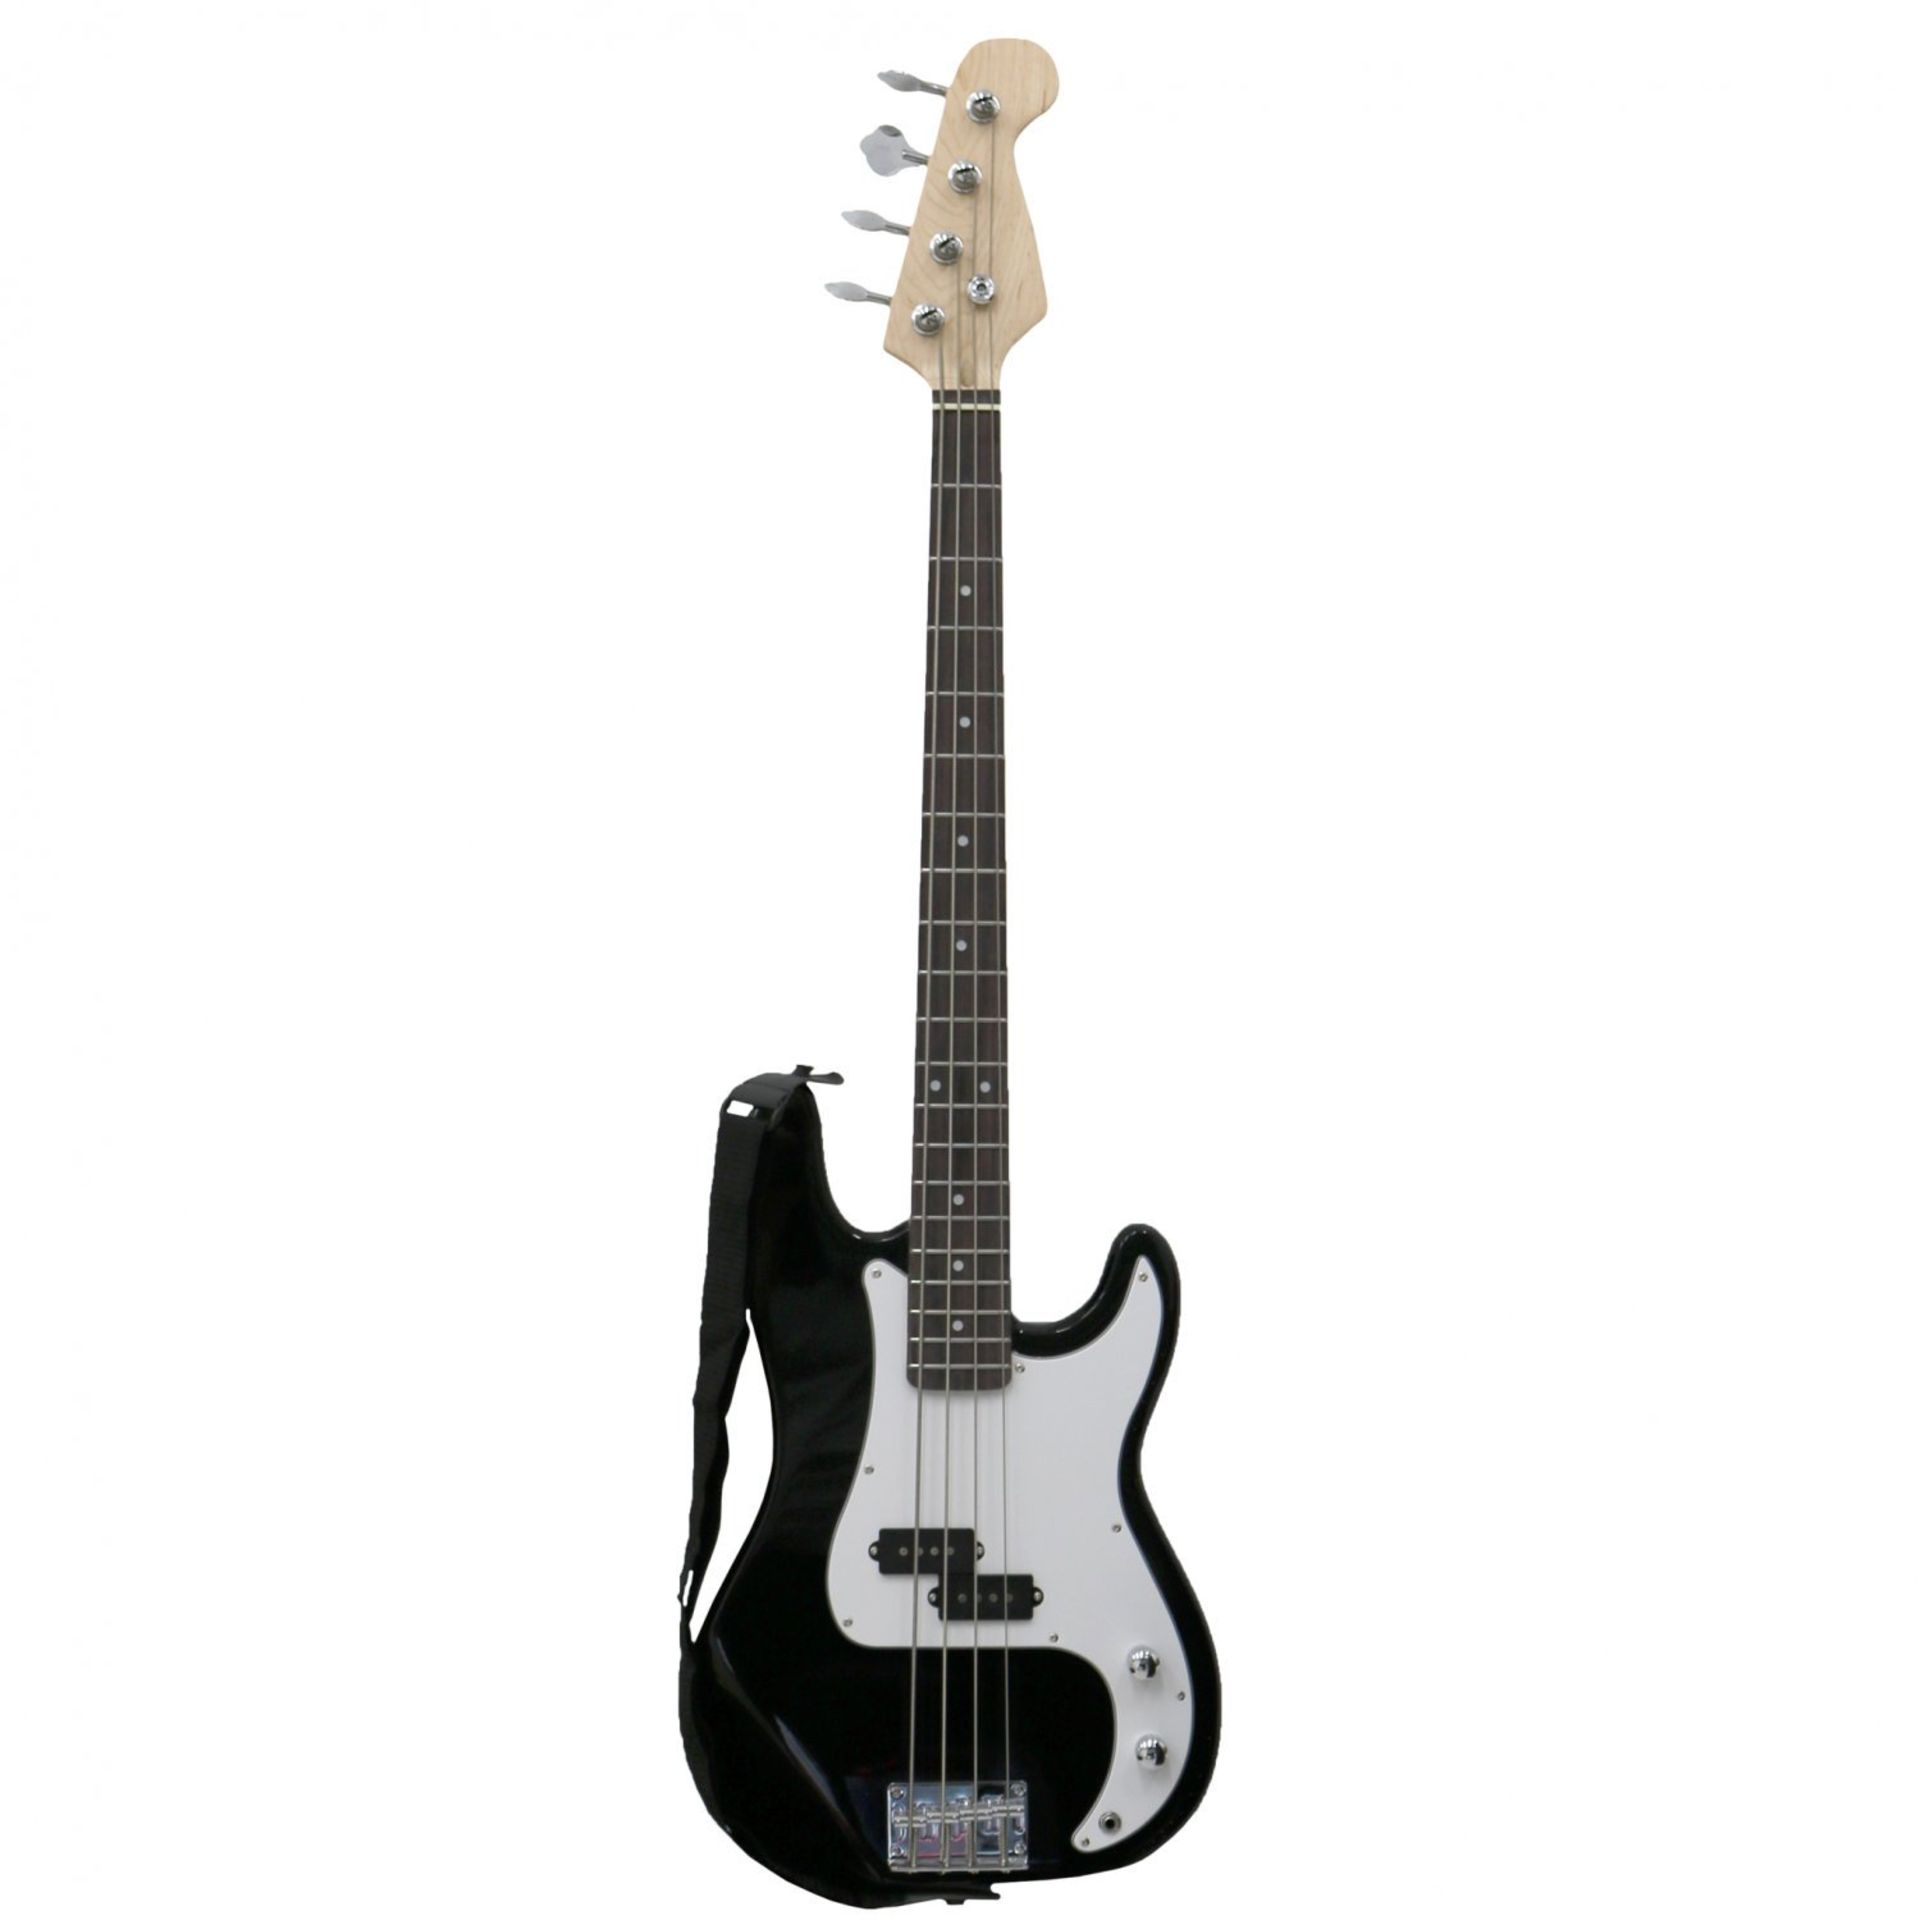 (LF212) PB Precision Style Black 4 String Electric Bass Guitar & 15W Amp The PB is a precisi... - Image 2 of 2